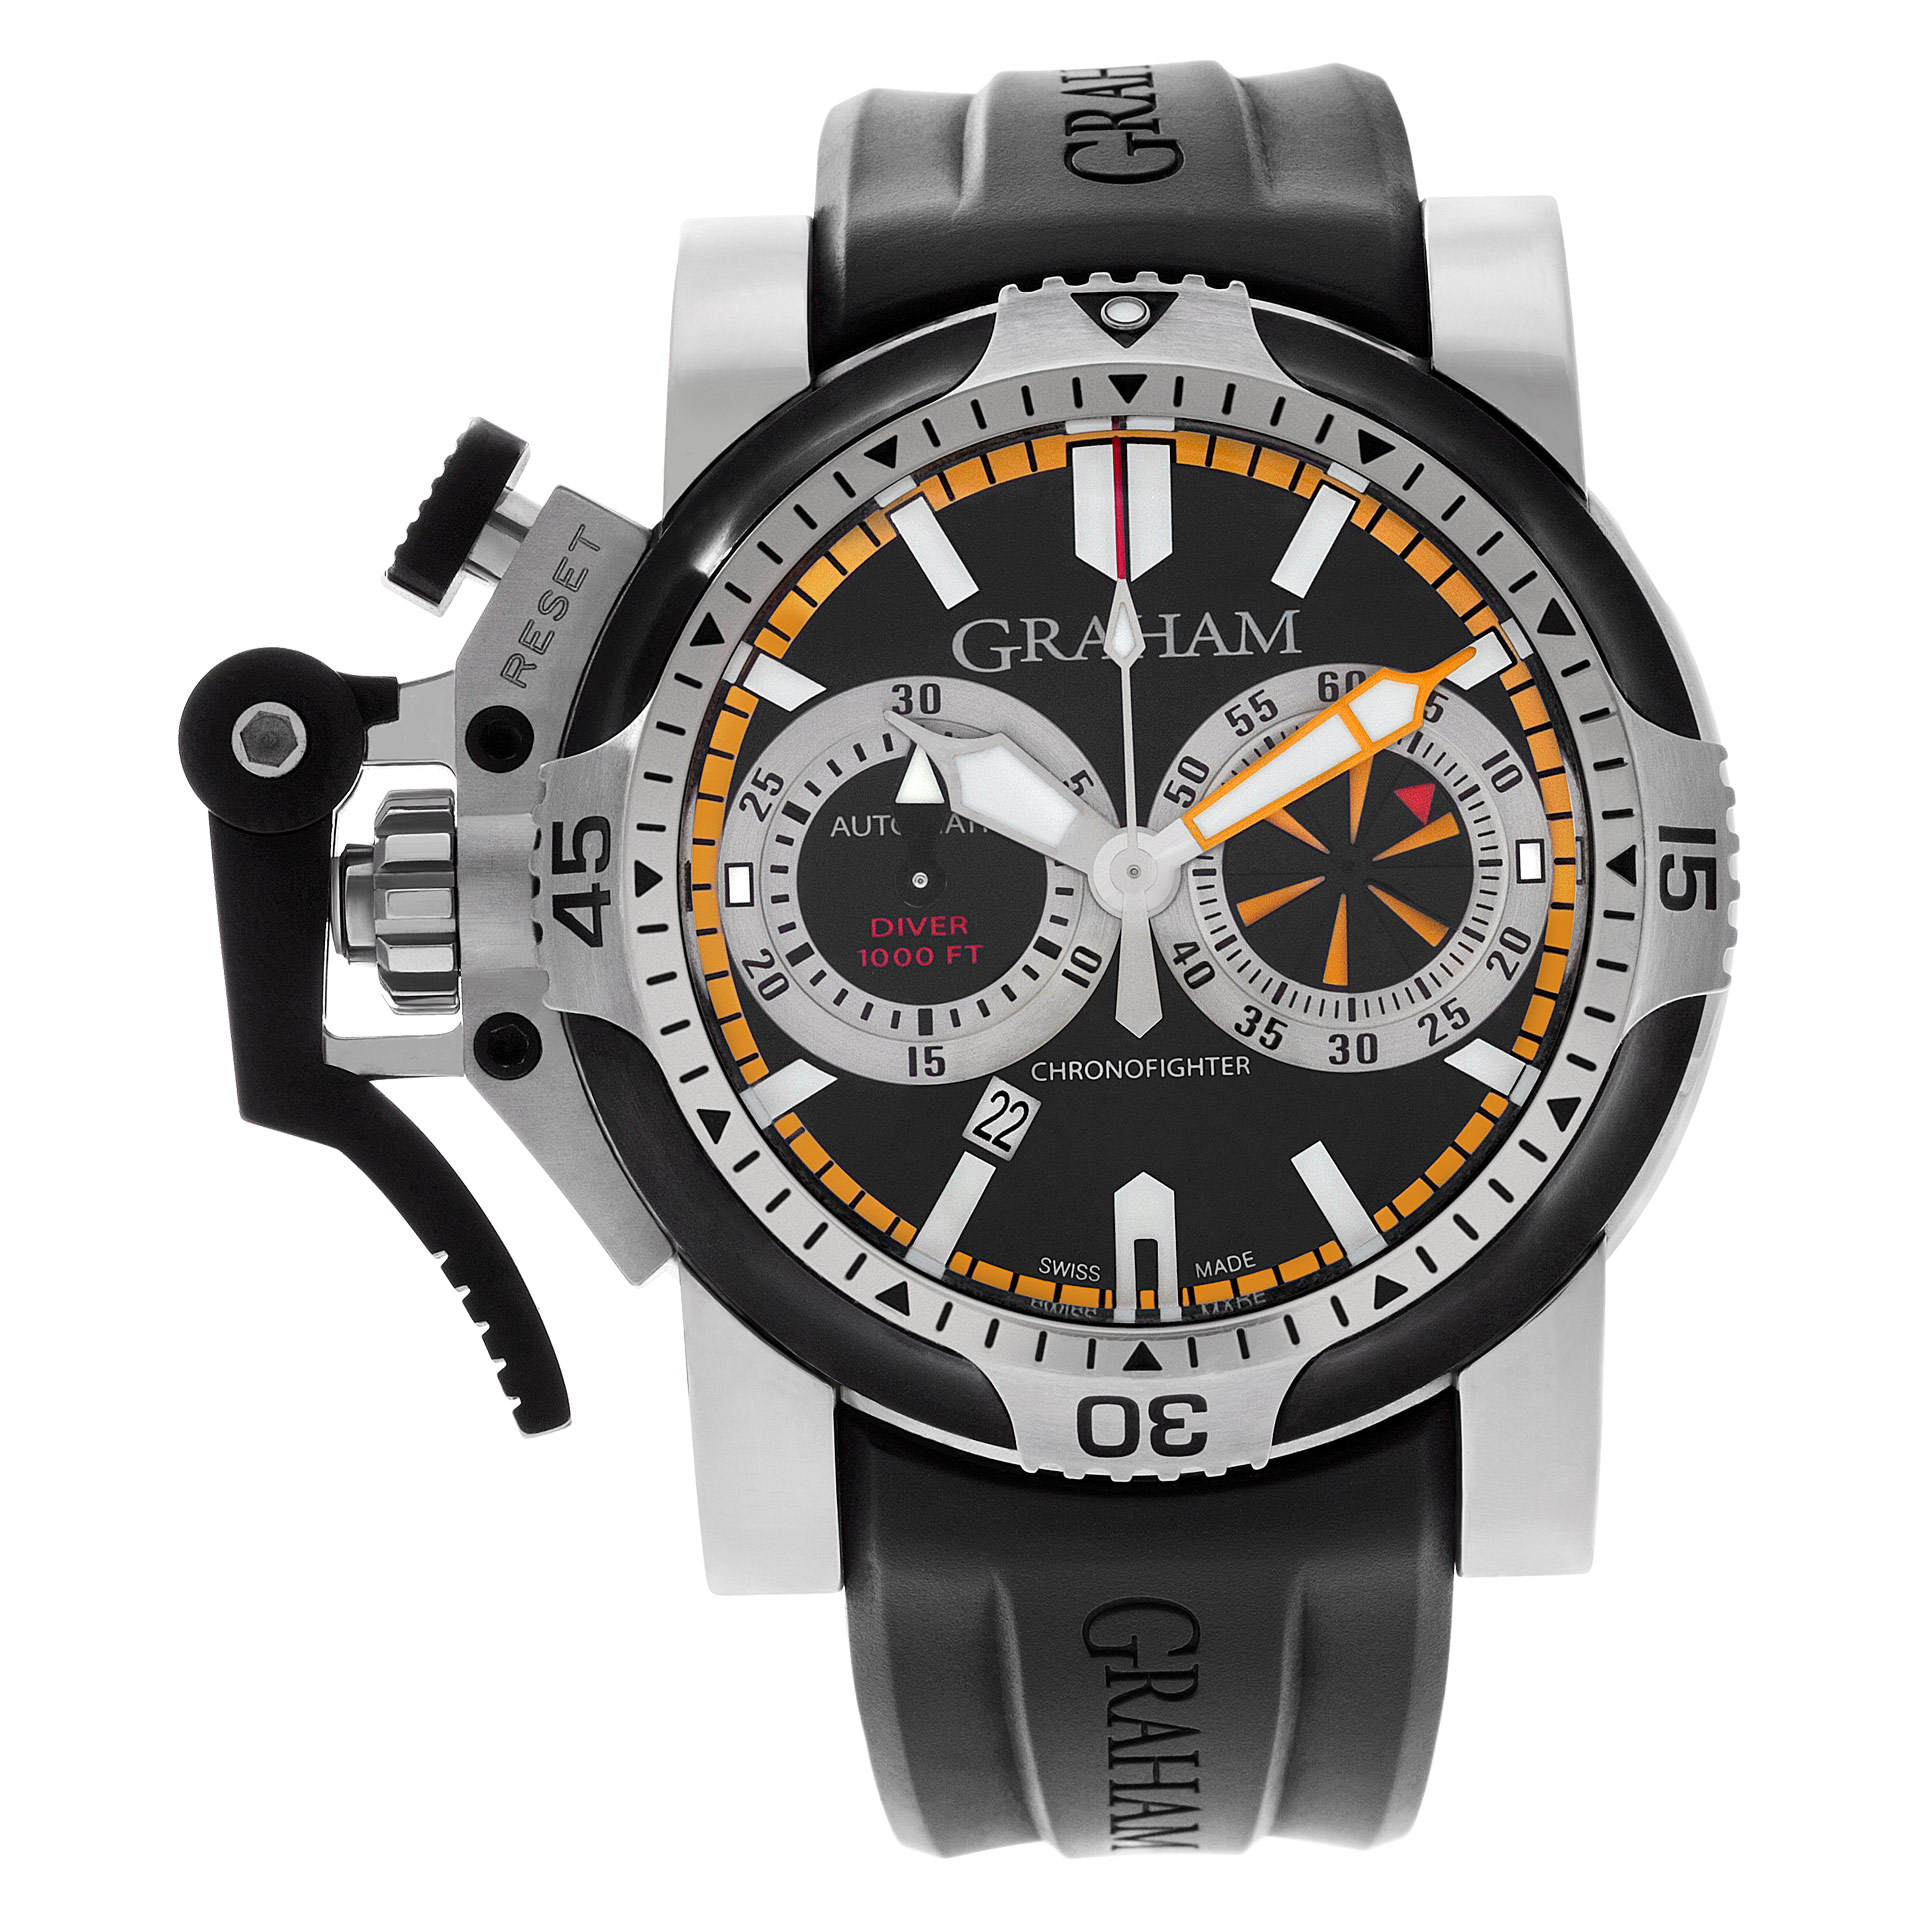 Graham Chronofighter 46.5mm 2OVES.B15A image 1